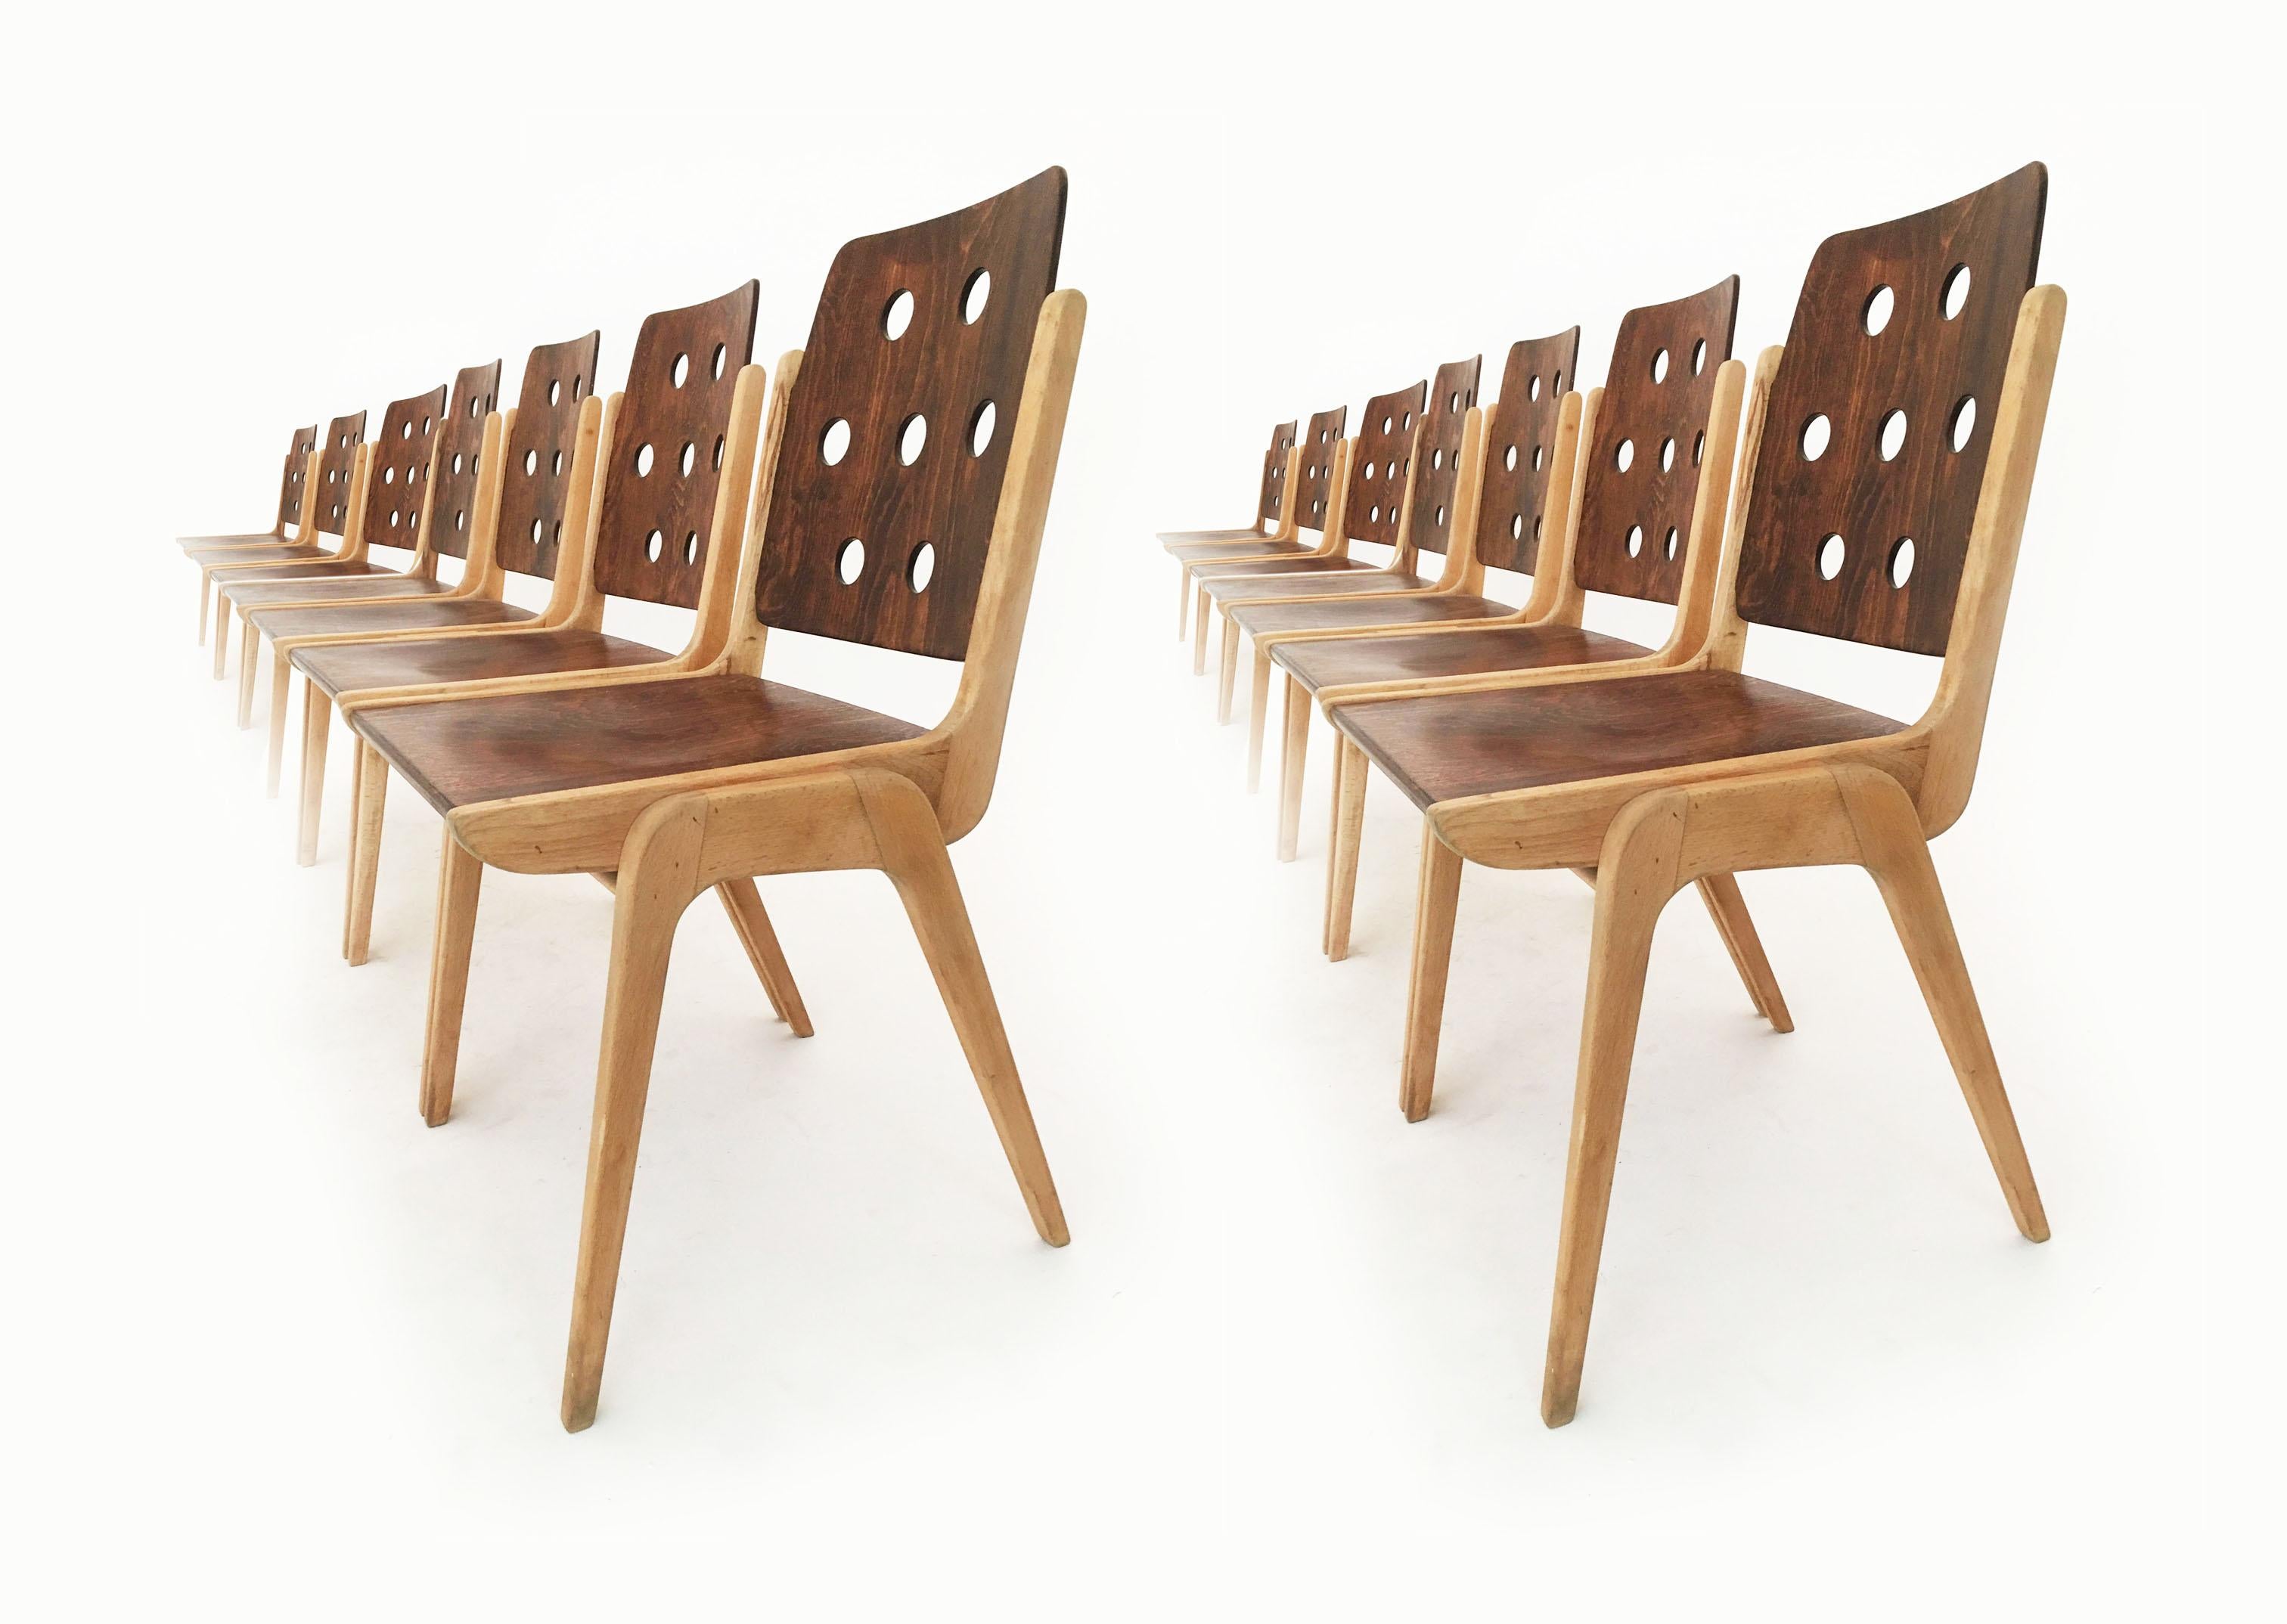 Set of 12 Stacking Dining Chairs Franz Schuster, Duo-Colored, Austria, 1950s For Sale 6